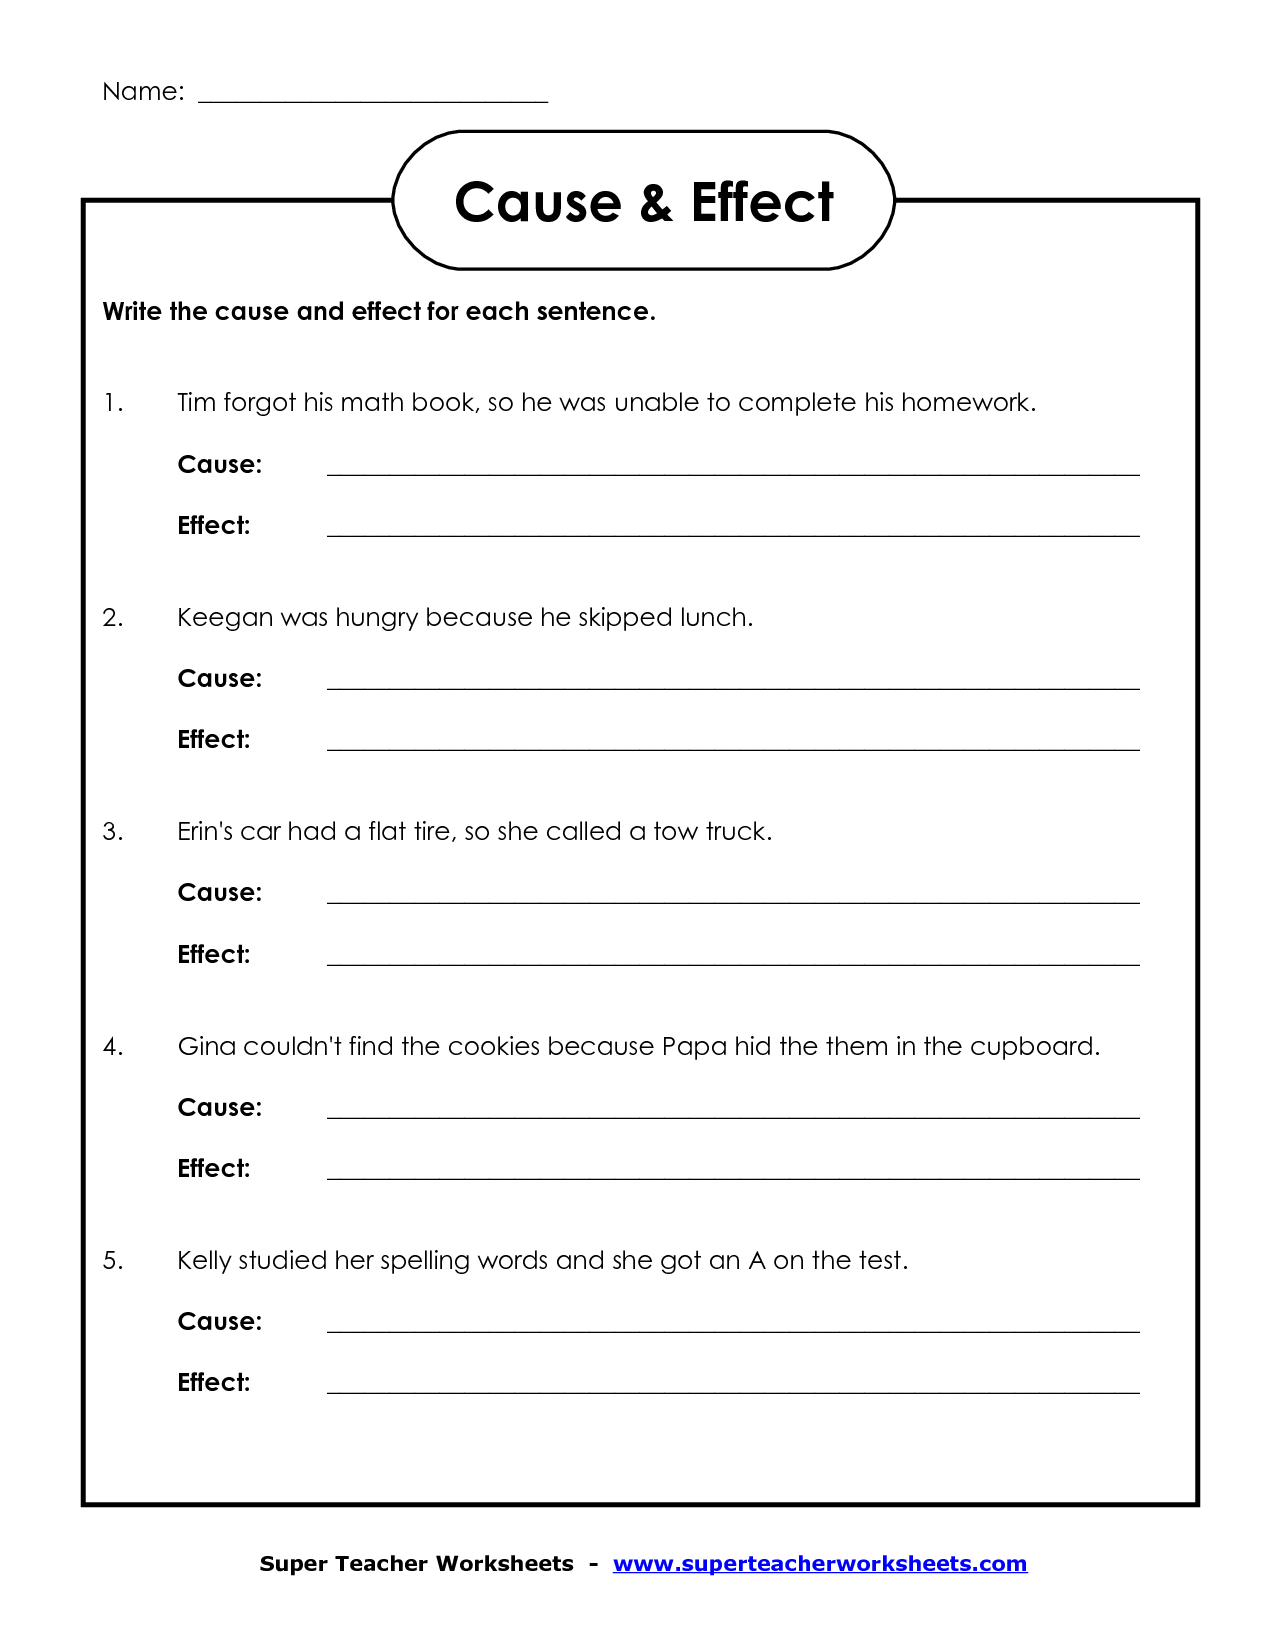 Cause and Effect Worksheets 1st Grade